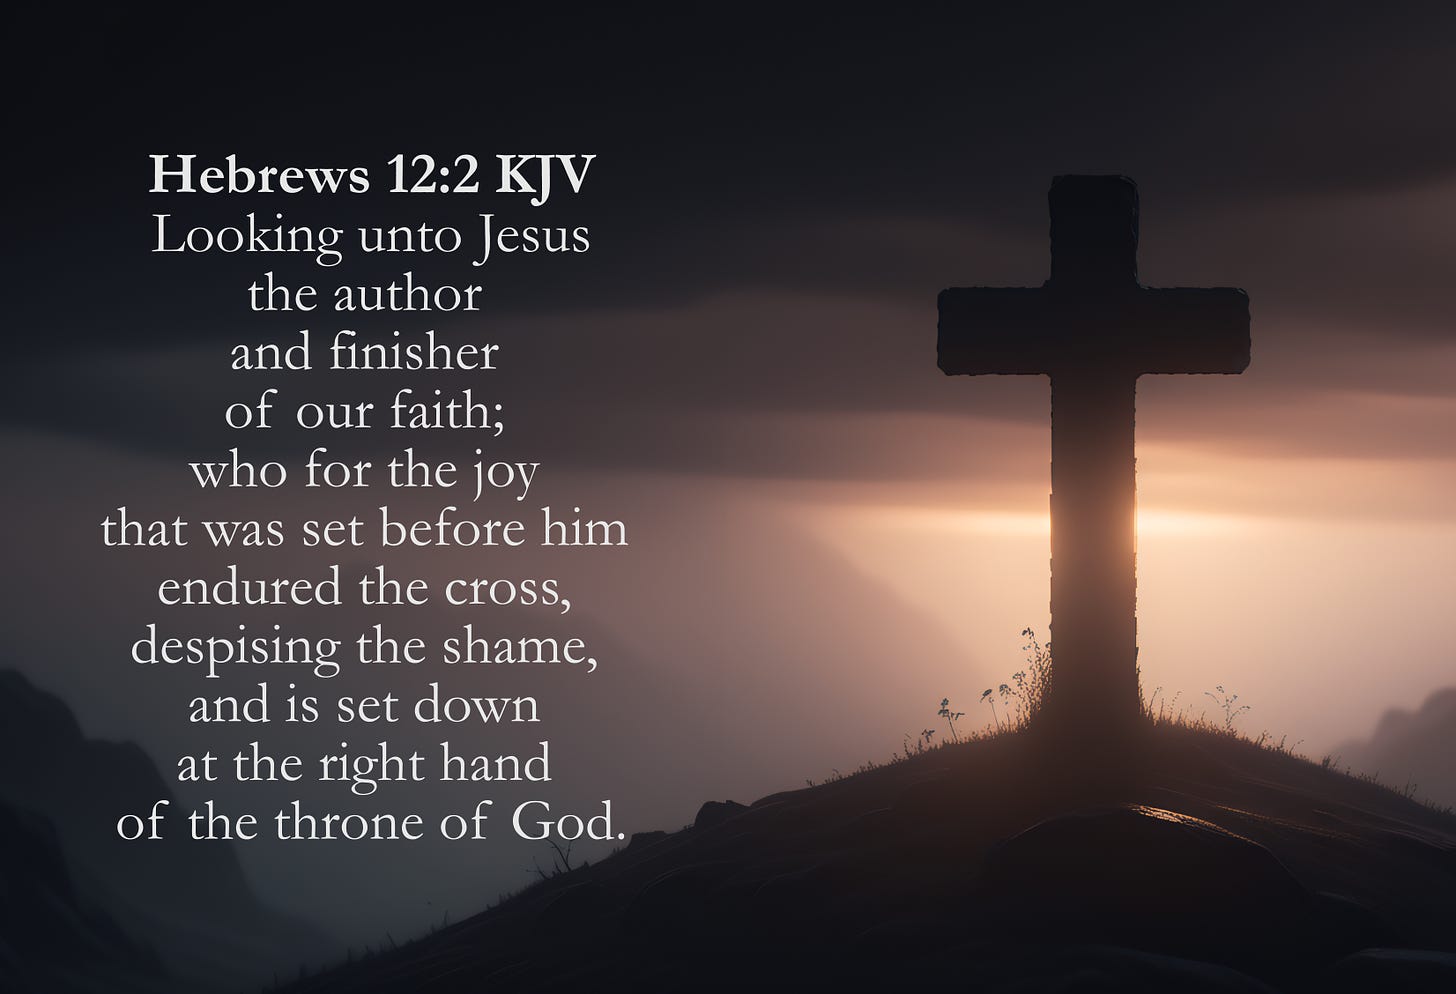 Dark Shameful Cross KJV Card -  Hebrews 12:2 KJV - Looking unto Jesus the author and finisher of our faith who for the joy that was set before him endured the cross despising the shame and is set down at the right hand of the throne of God. 